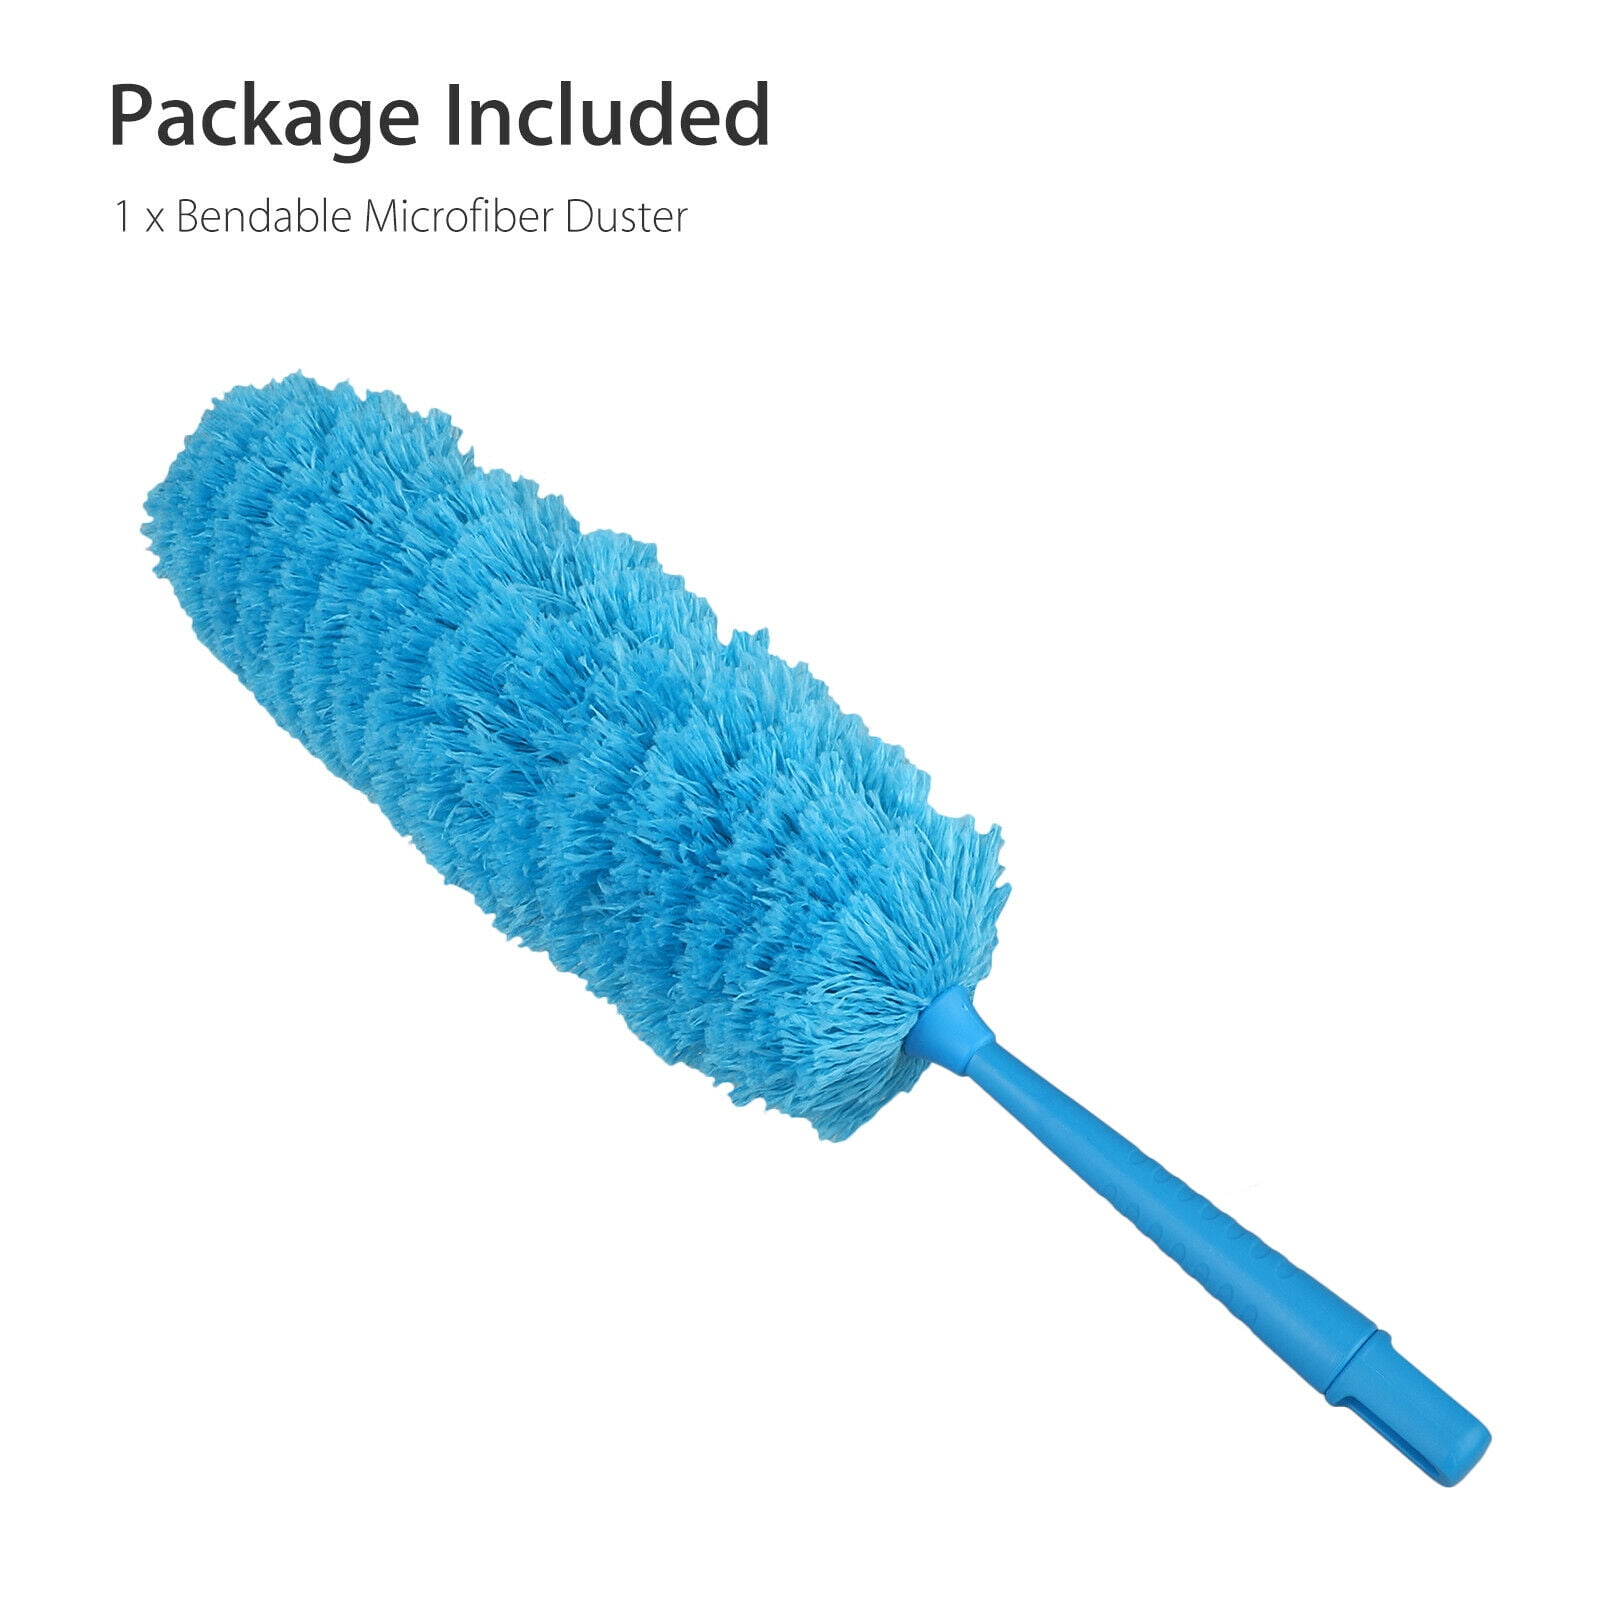 Dhvsam Multifunctional Dust Brush/Soft Cleaning Brush/Dusting Brush/Dusters  for Cleaning Home/Brush with Microfiber/No dust/Soft bristles for, Bed,  Wardrobe, Couch, Car Seats, Piano White (Pack of 1) Cleaning Brush Price in  India - Buy